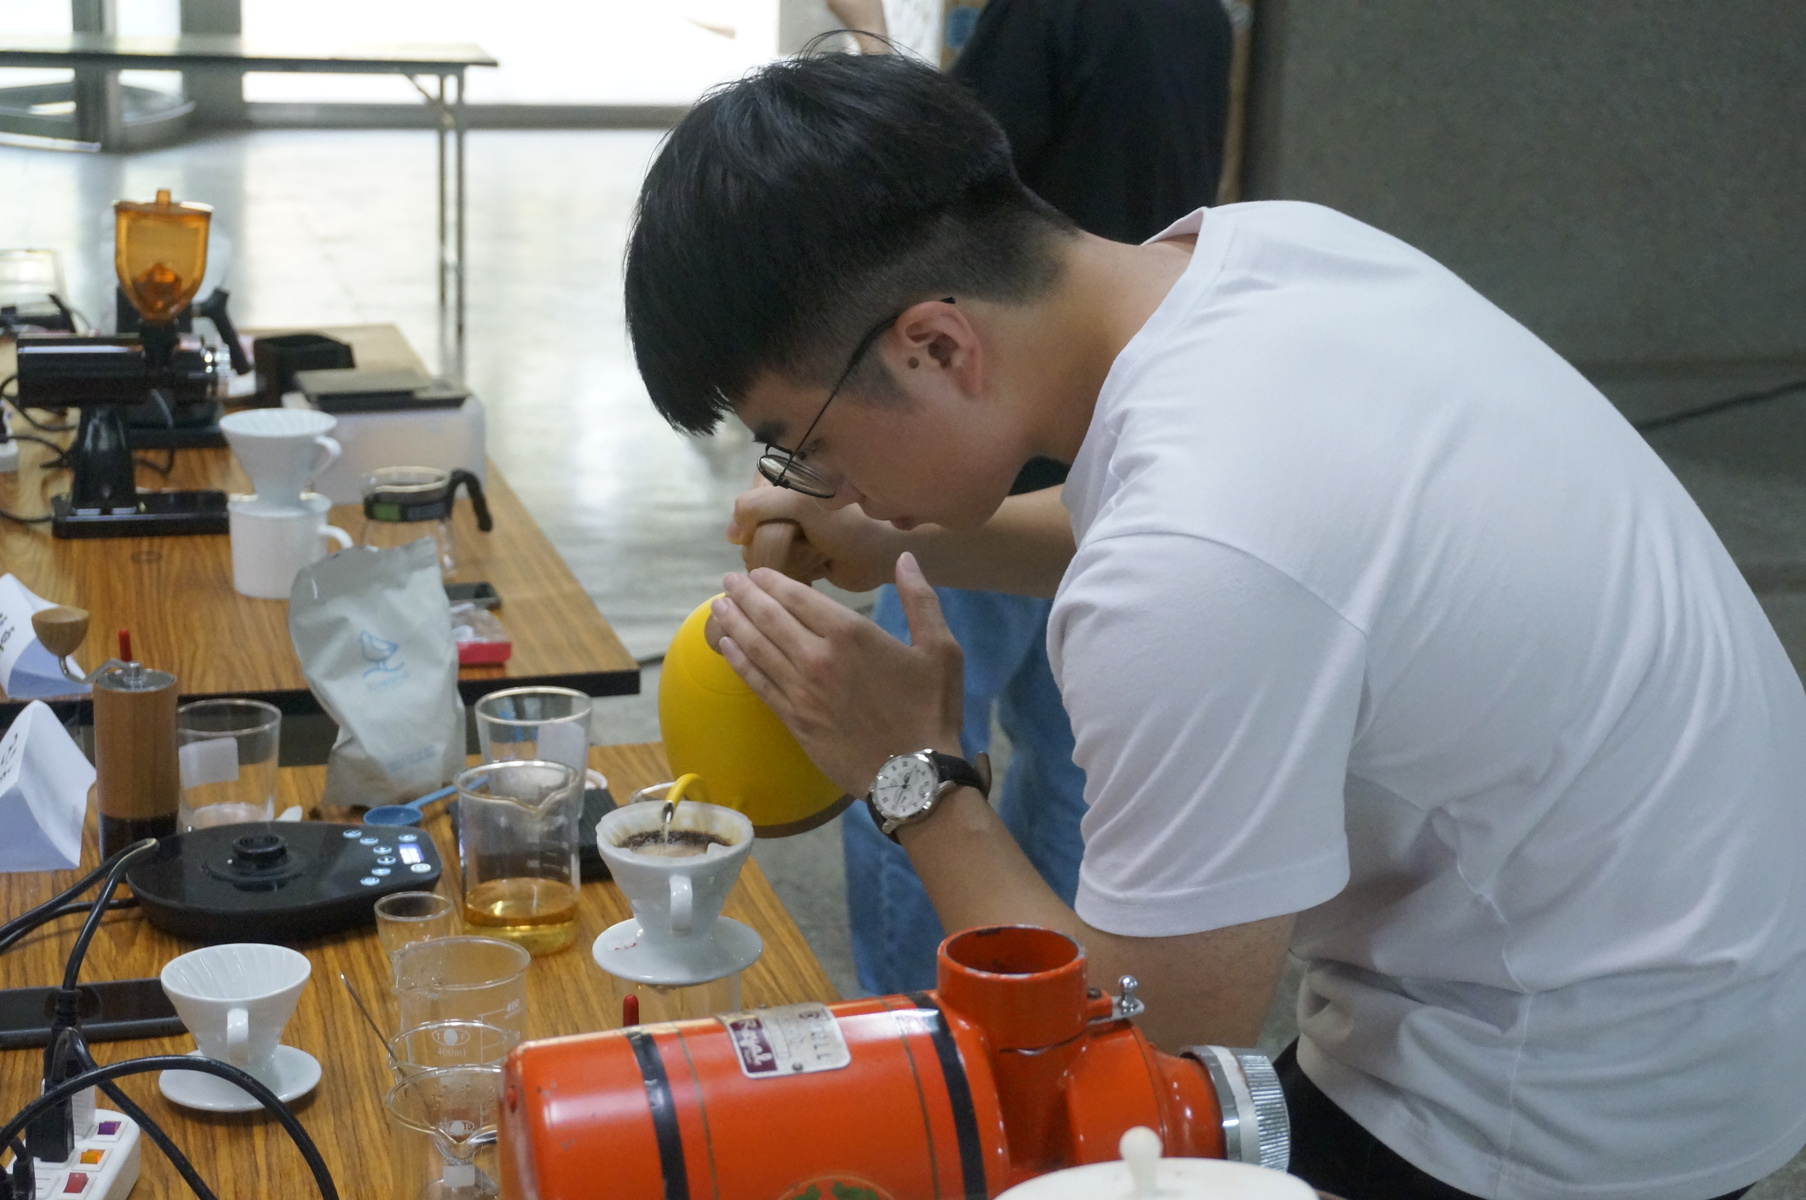 Yi-Hao Su was chosen to represent the team and brew coffee on stage.